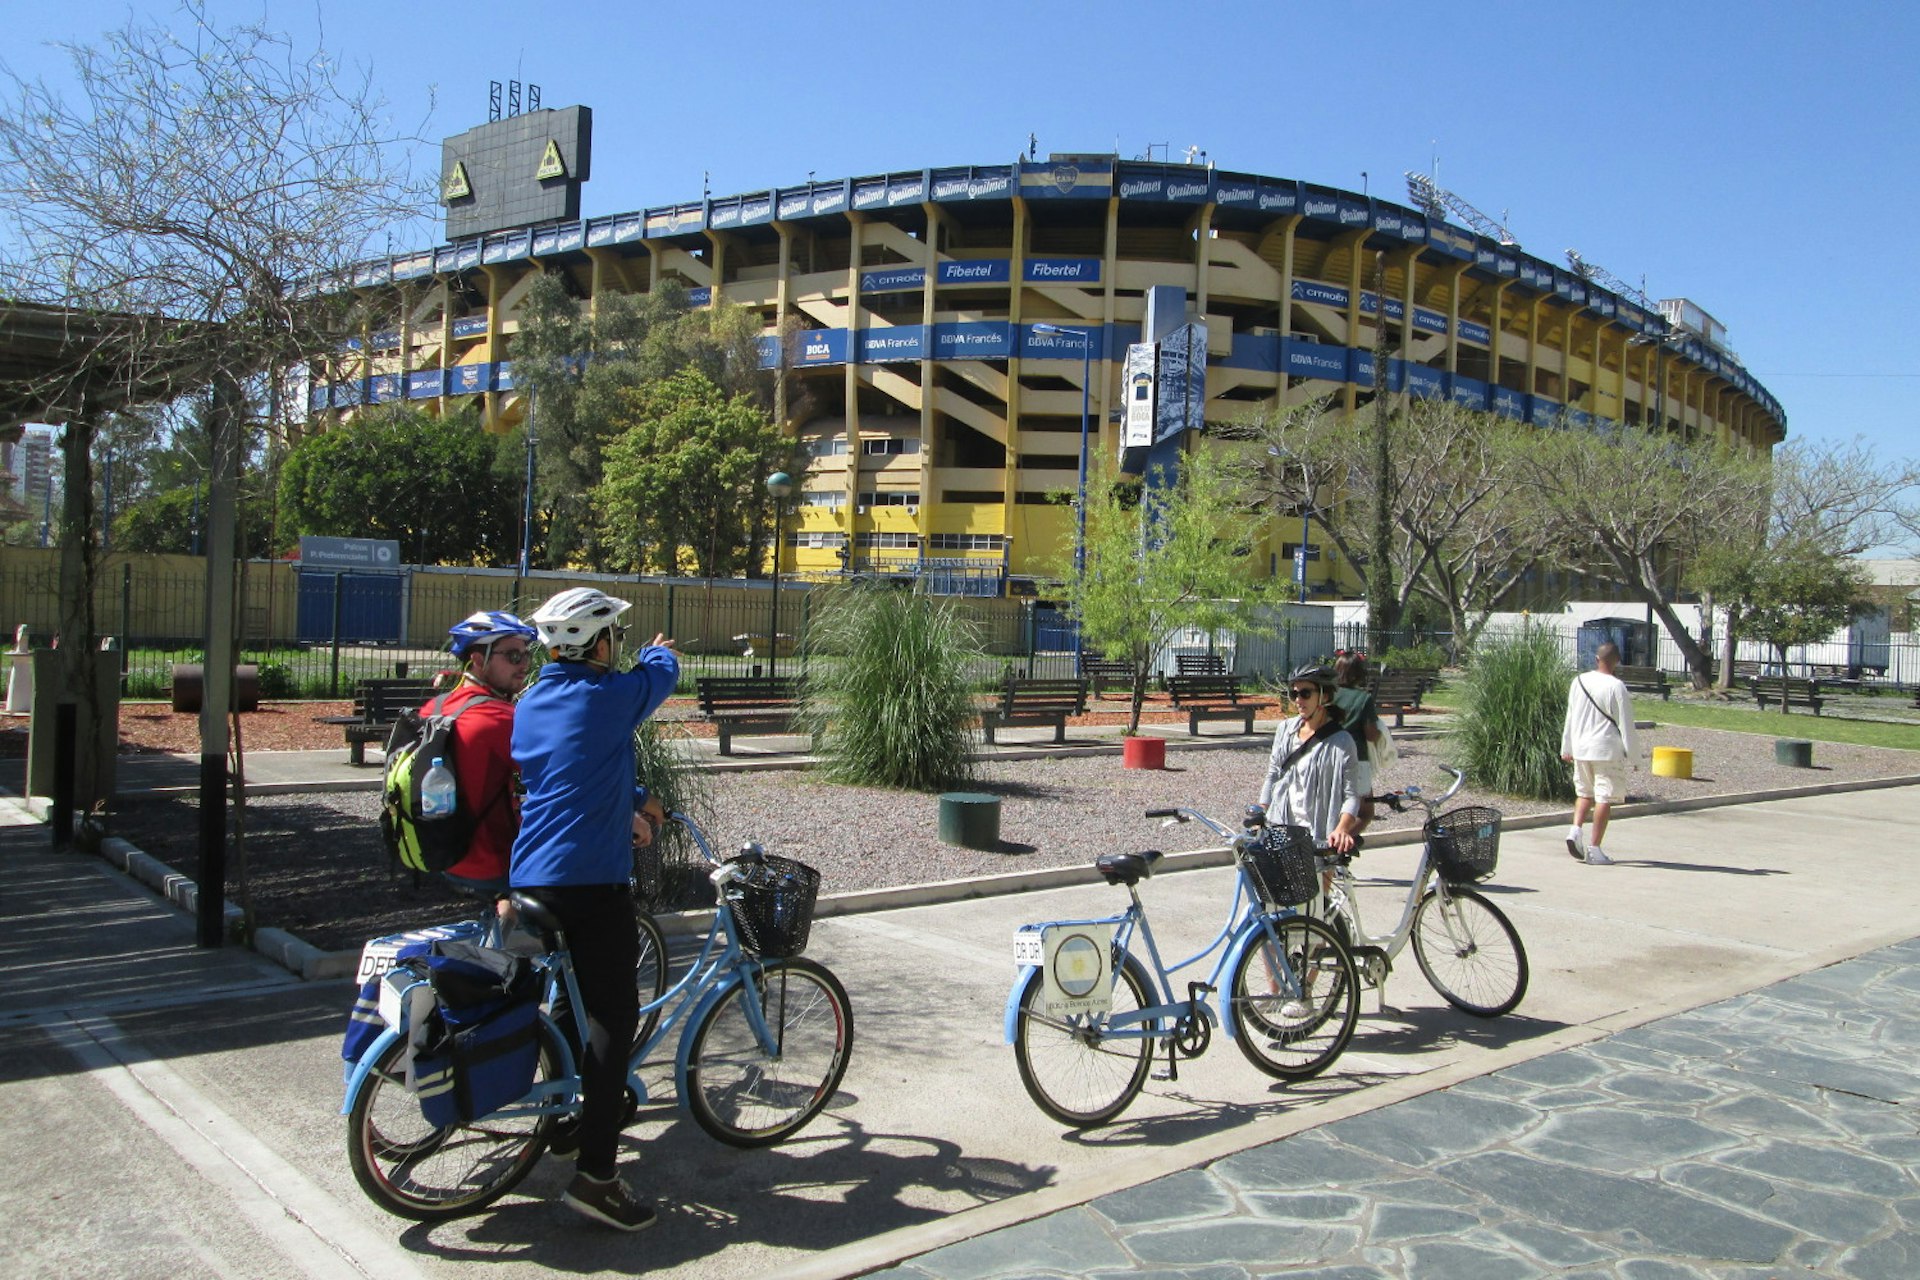 Several companies run cycling tours taking in BA's top sights. Image by Isabel Albiston / Lonely Planet